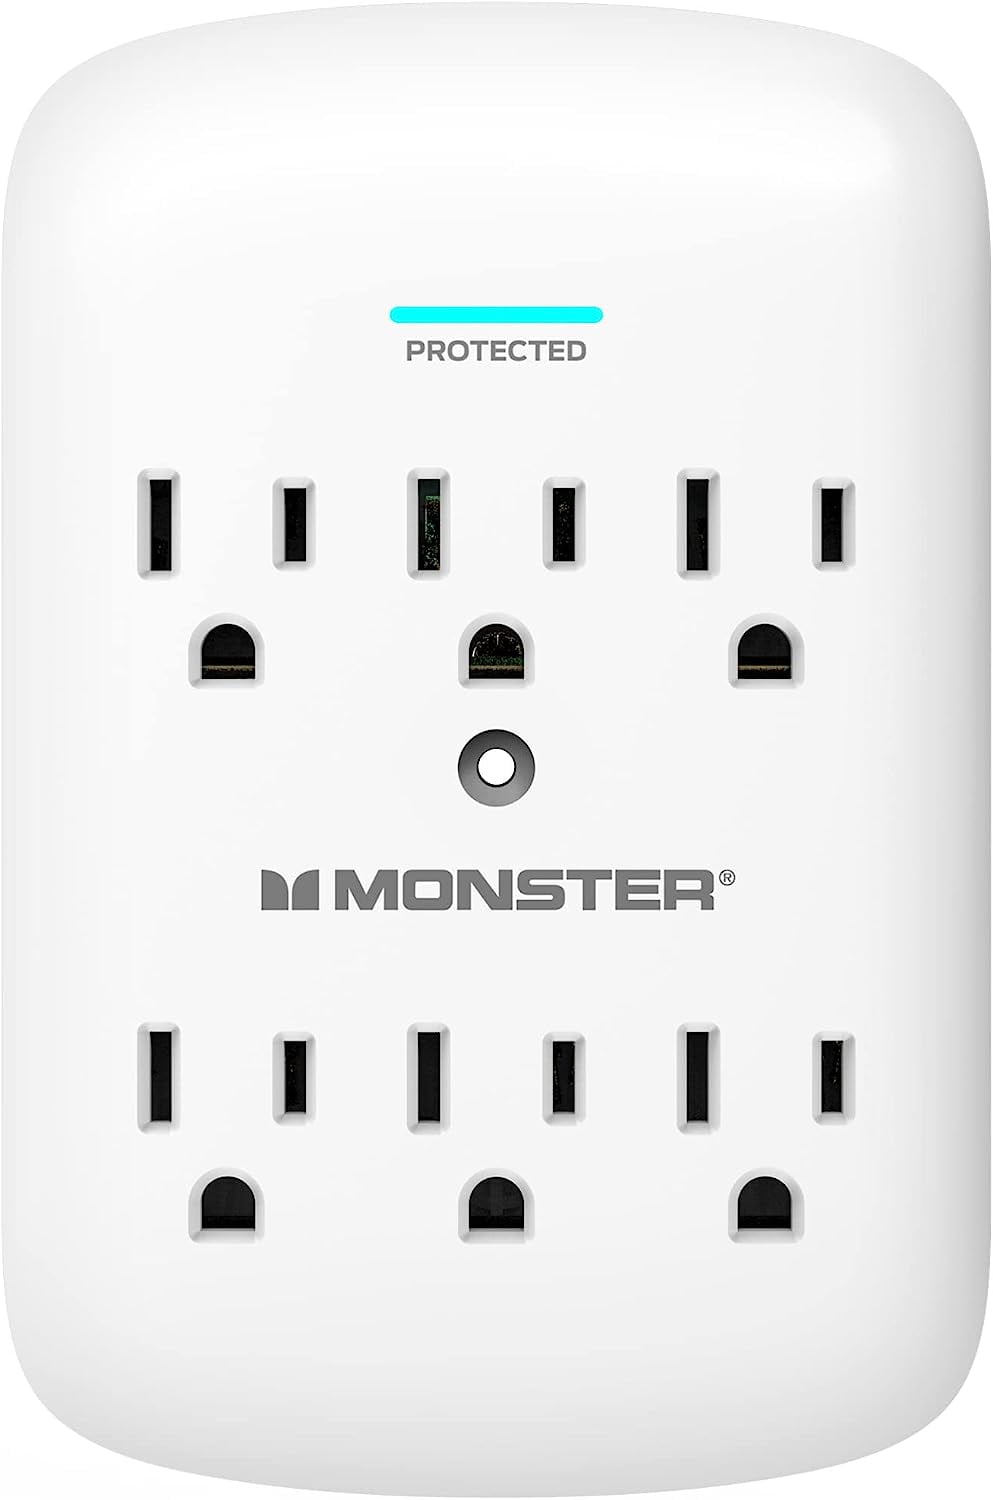 Monster Wall Tap Plug 6-Outlet Extender with Outlet Surge Protector for  Home, Travel, Office, Home Appliances, Computers, and Smart Phone Devices – 